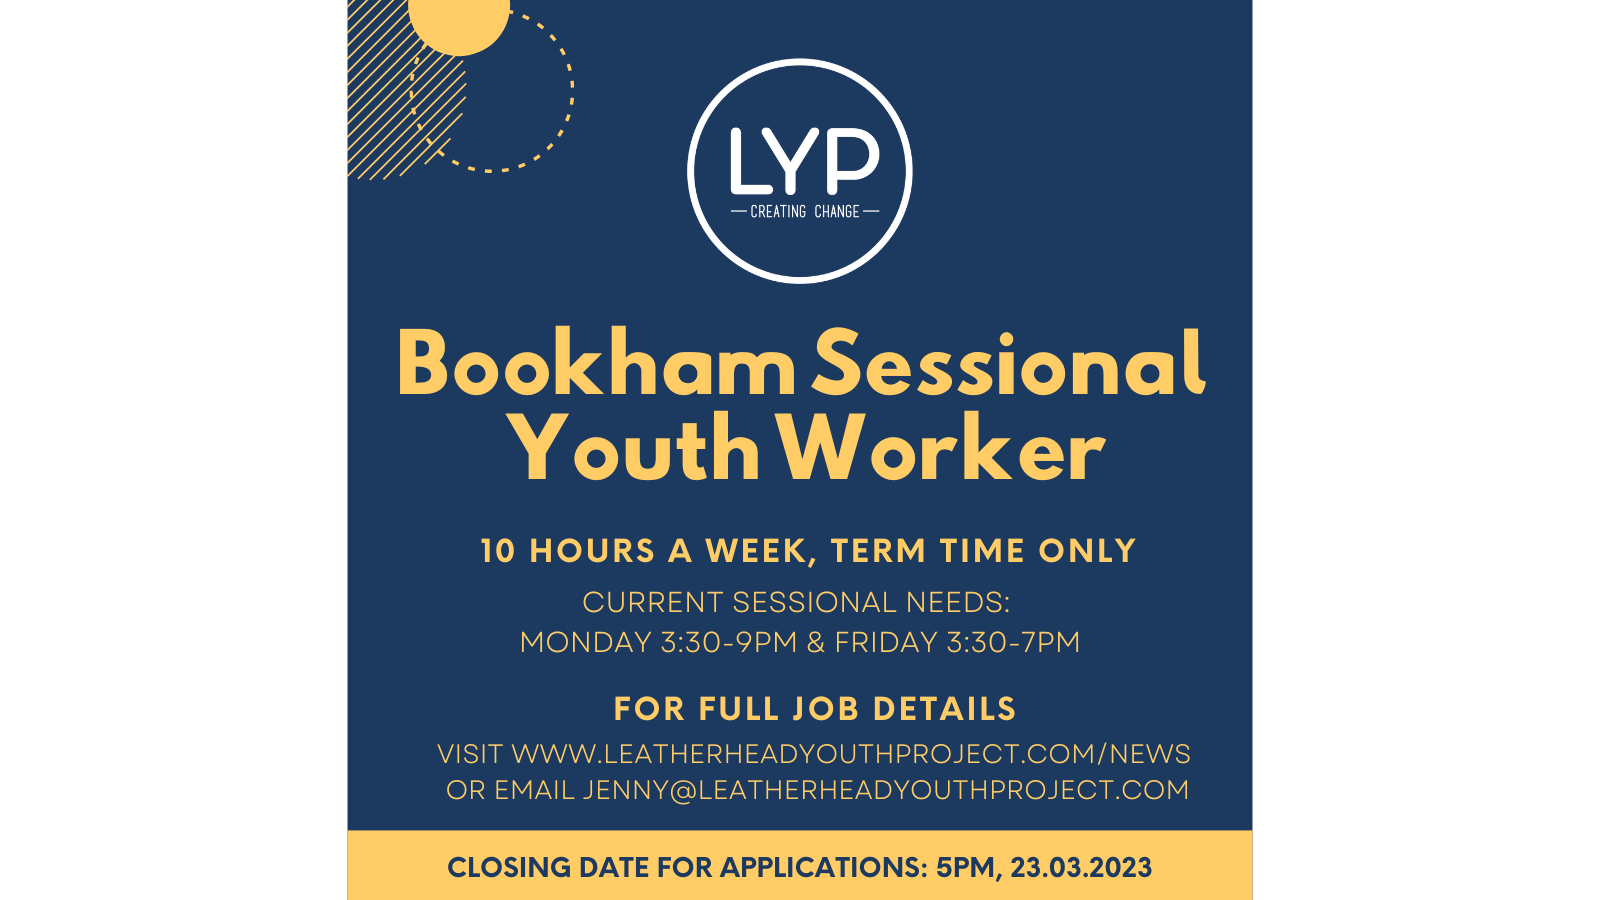 Taking Applications for a New Bookham Sessional Youth Worker